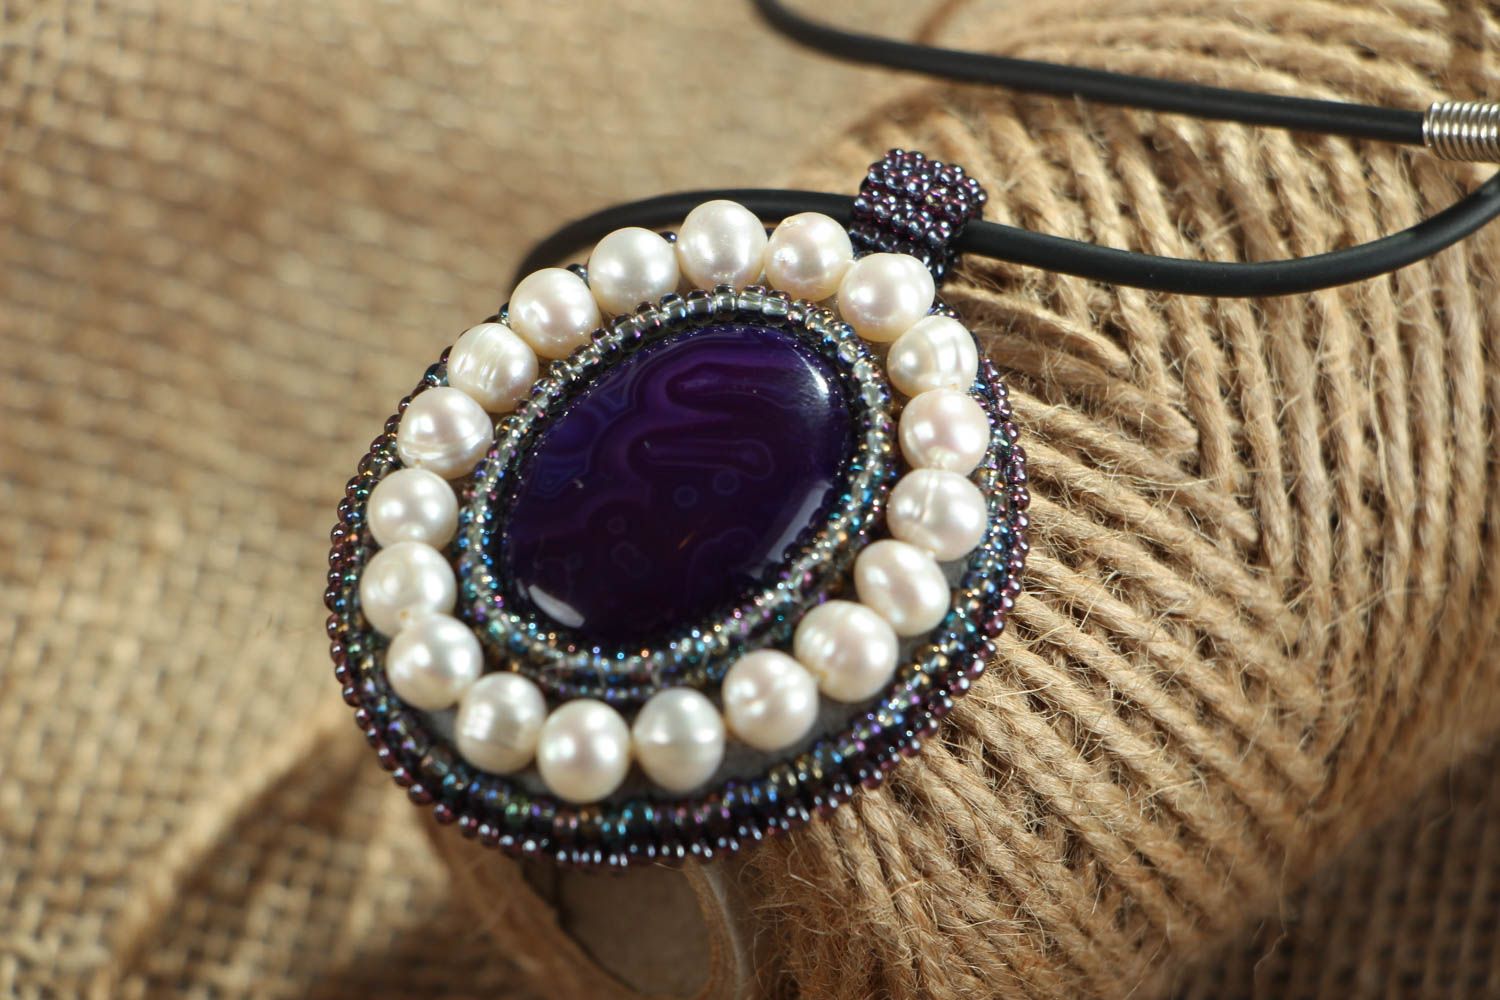 Homemade pendant with amethyst and pearls photo 5